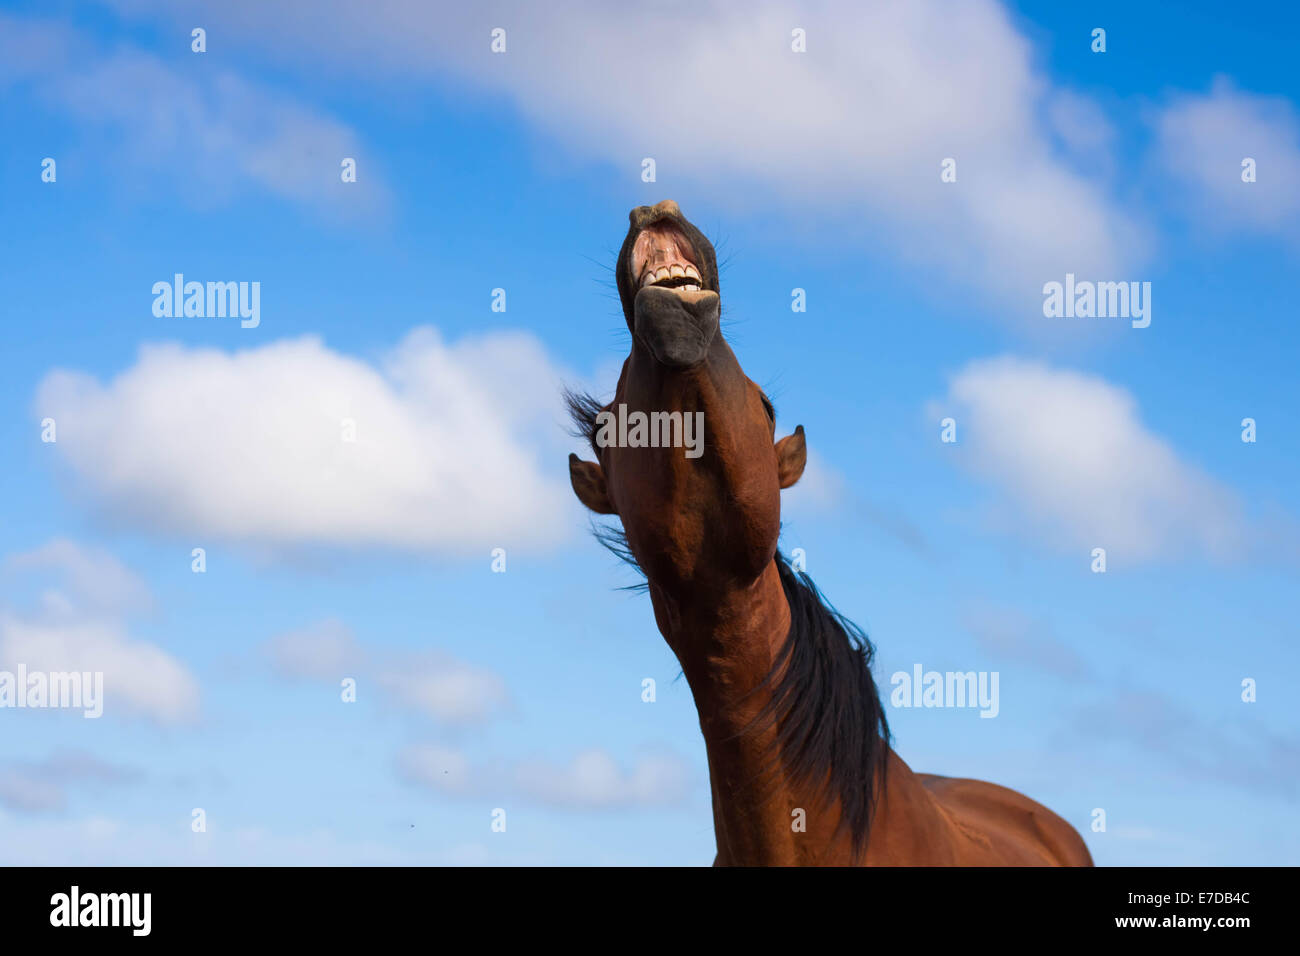 Horse braying against a blue sky with clouds Stock Photo